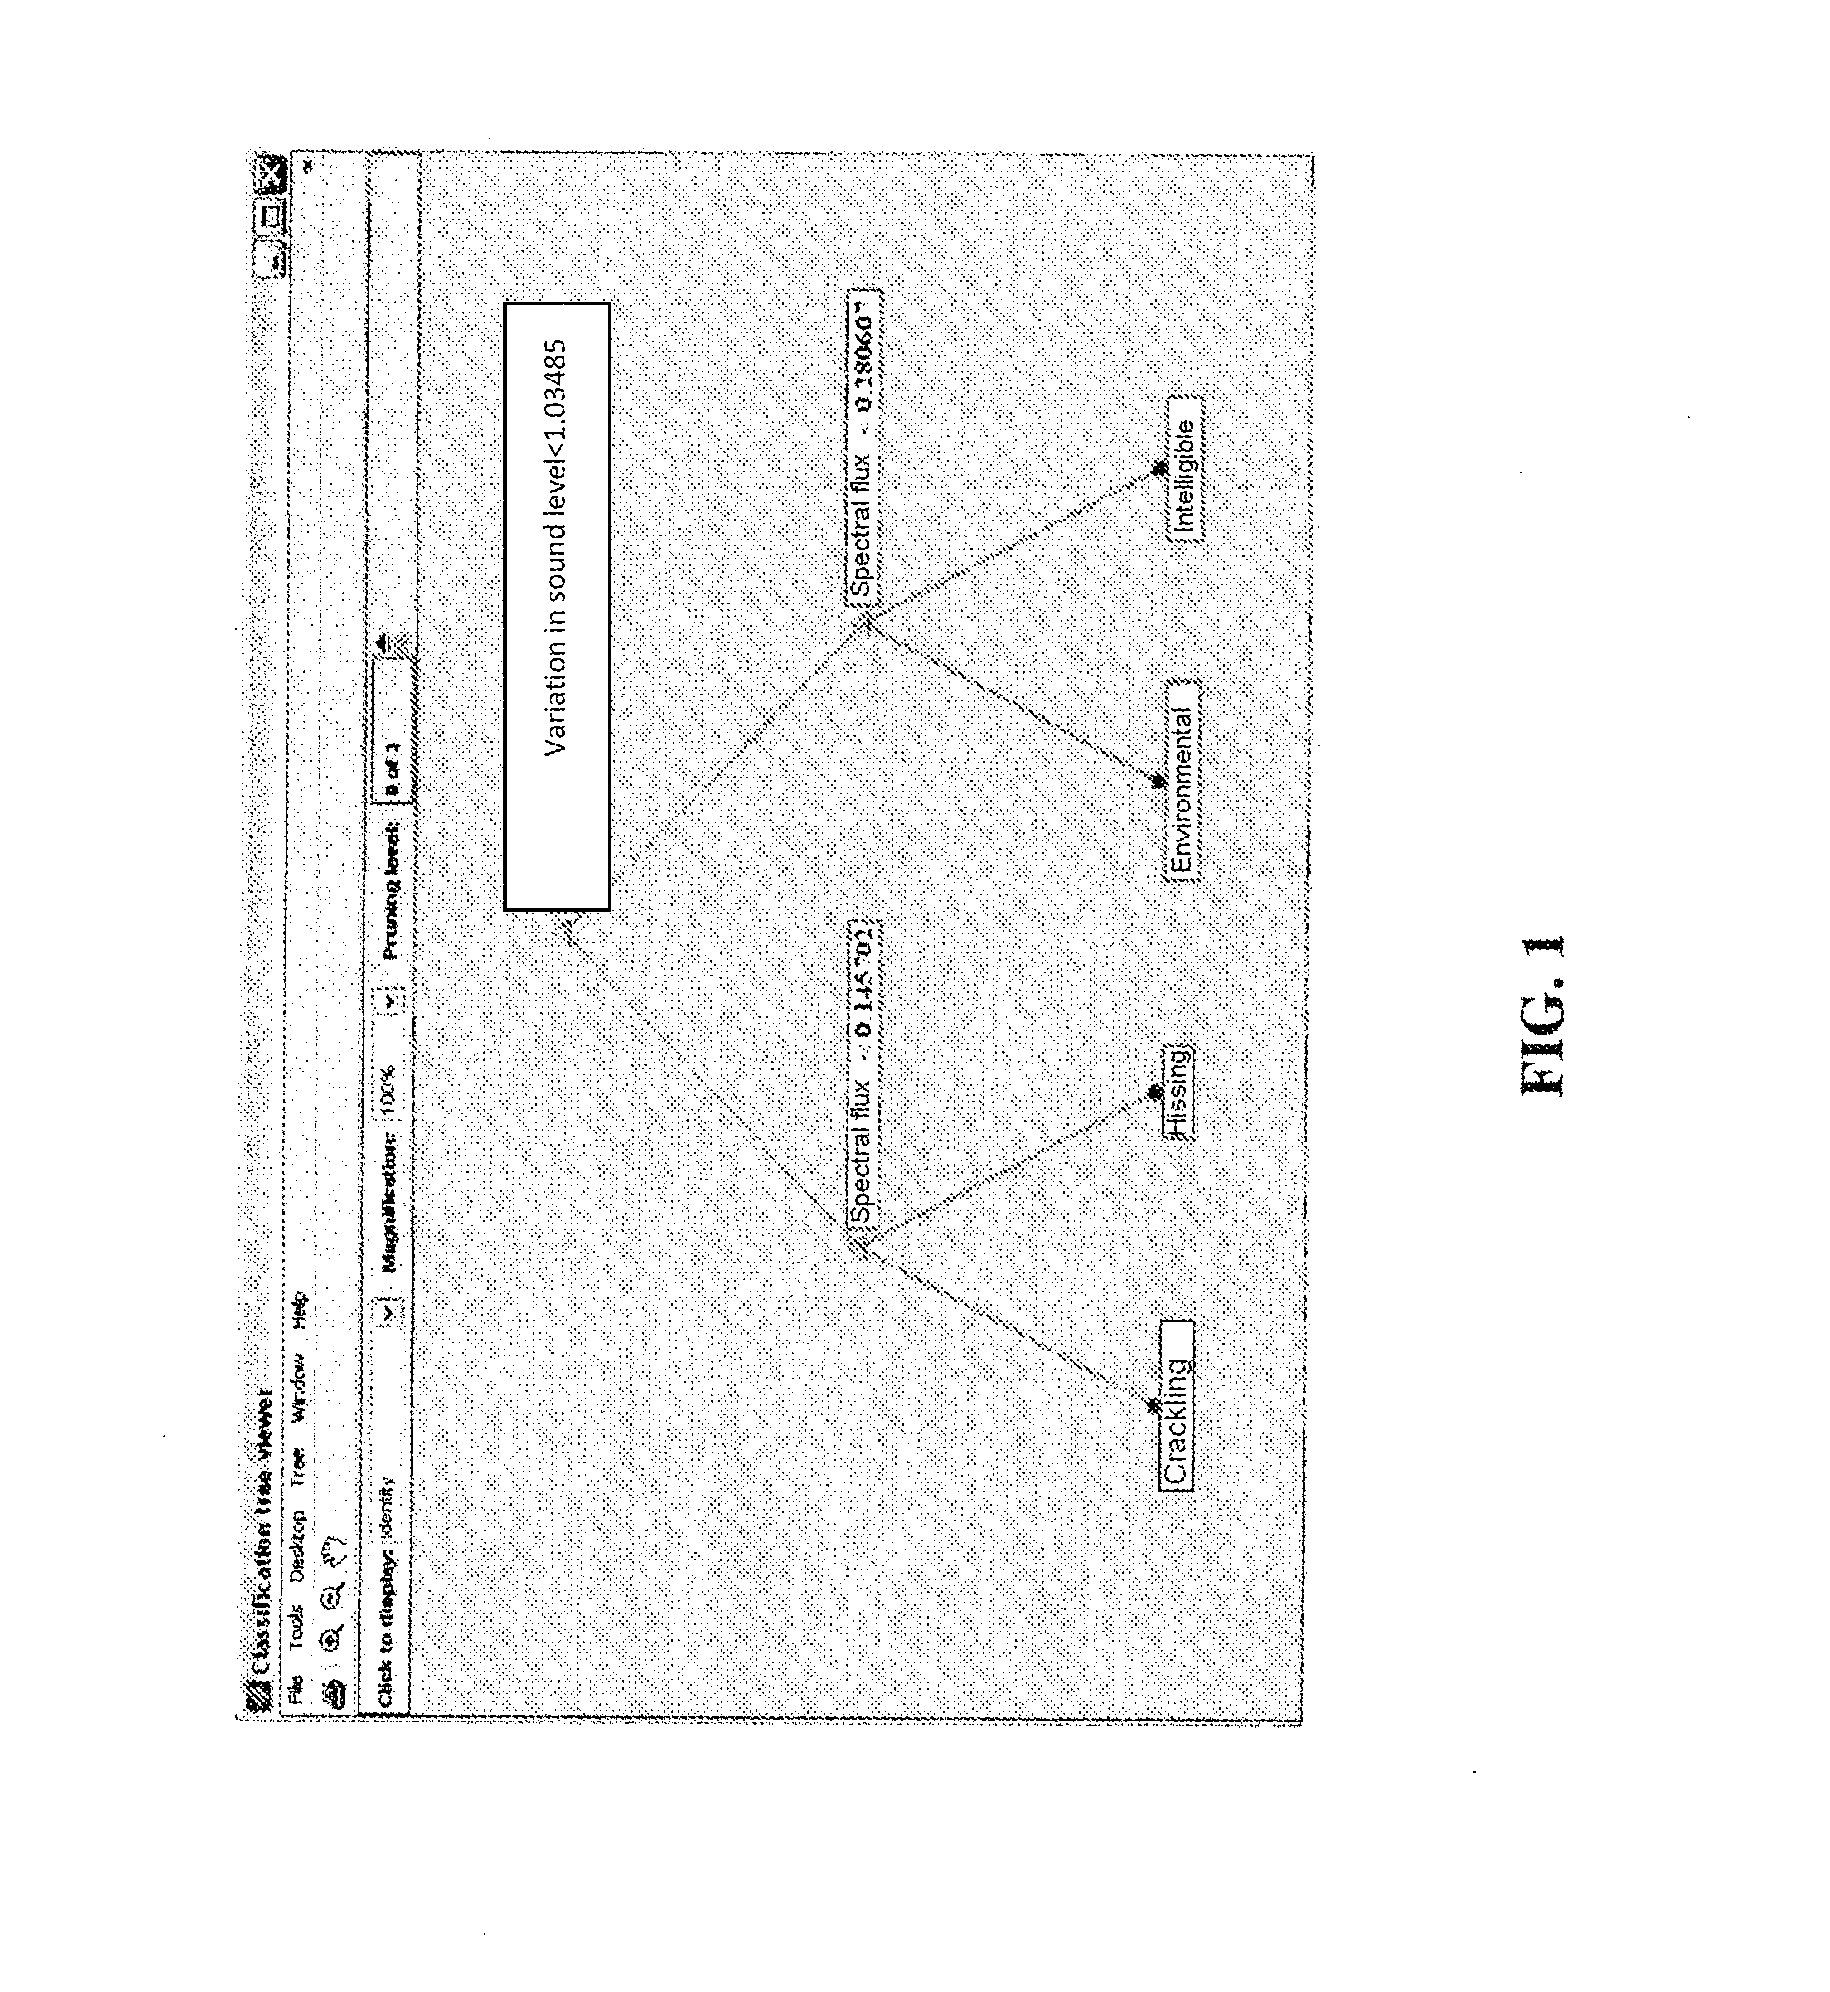 Method and device for classifying background noise contained in an audio signal